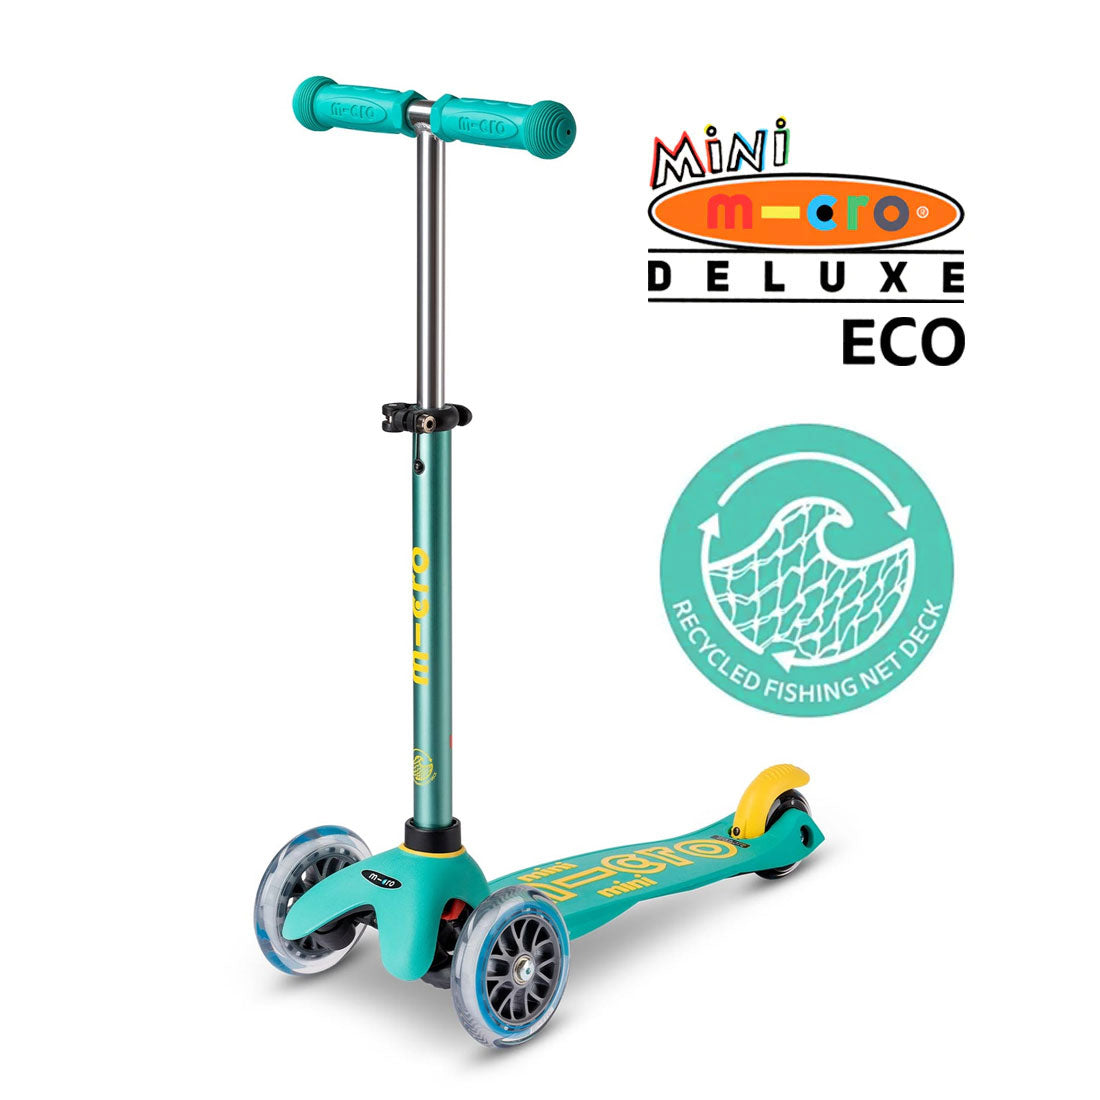 Micro Mini Deluxe ECO Scooter - Mint Scooter Completes Rec